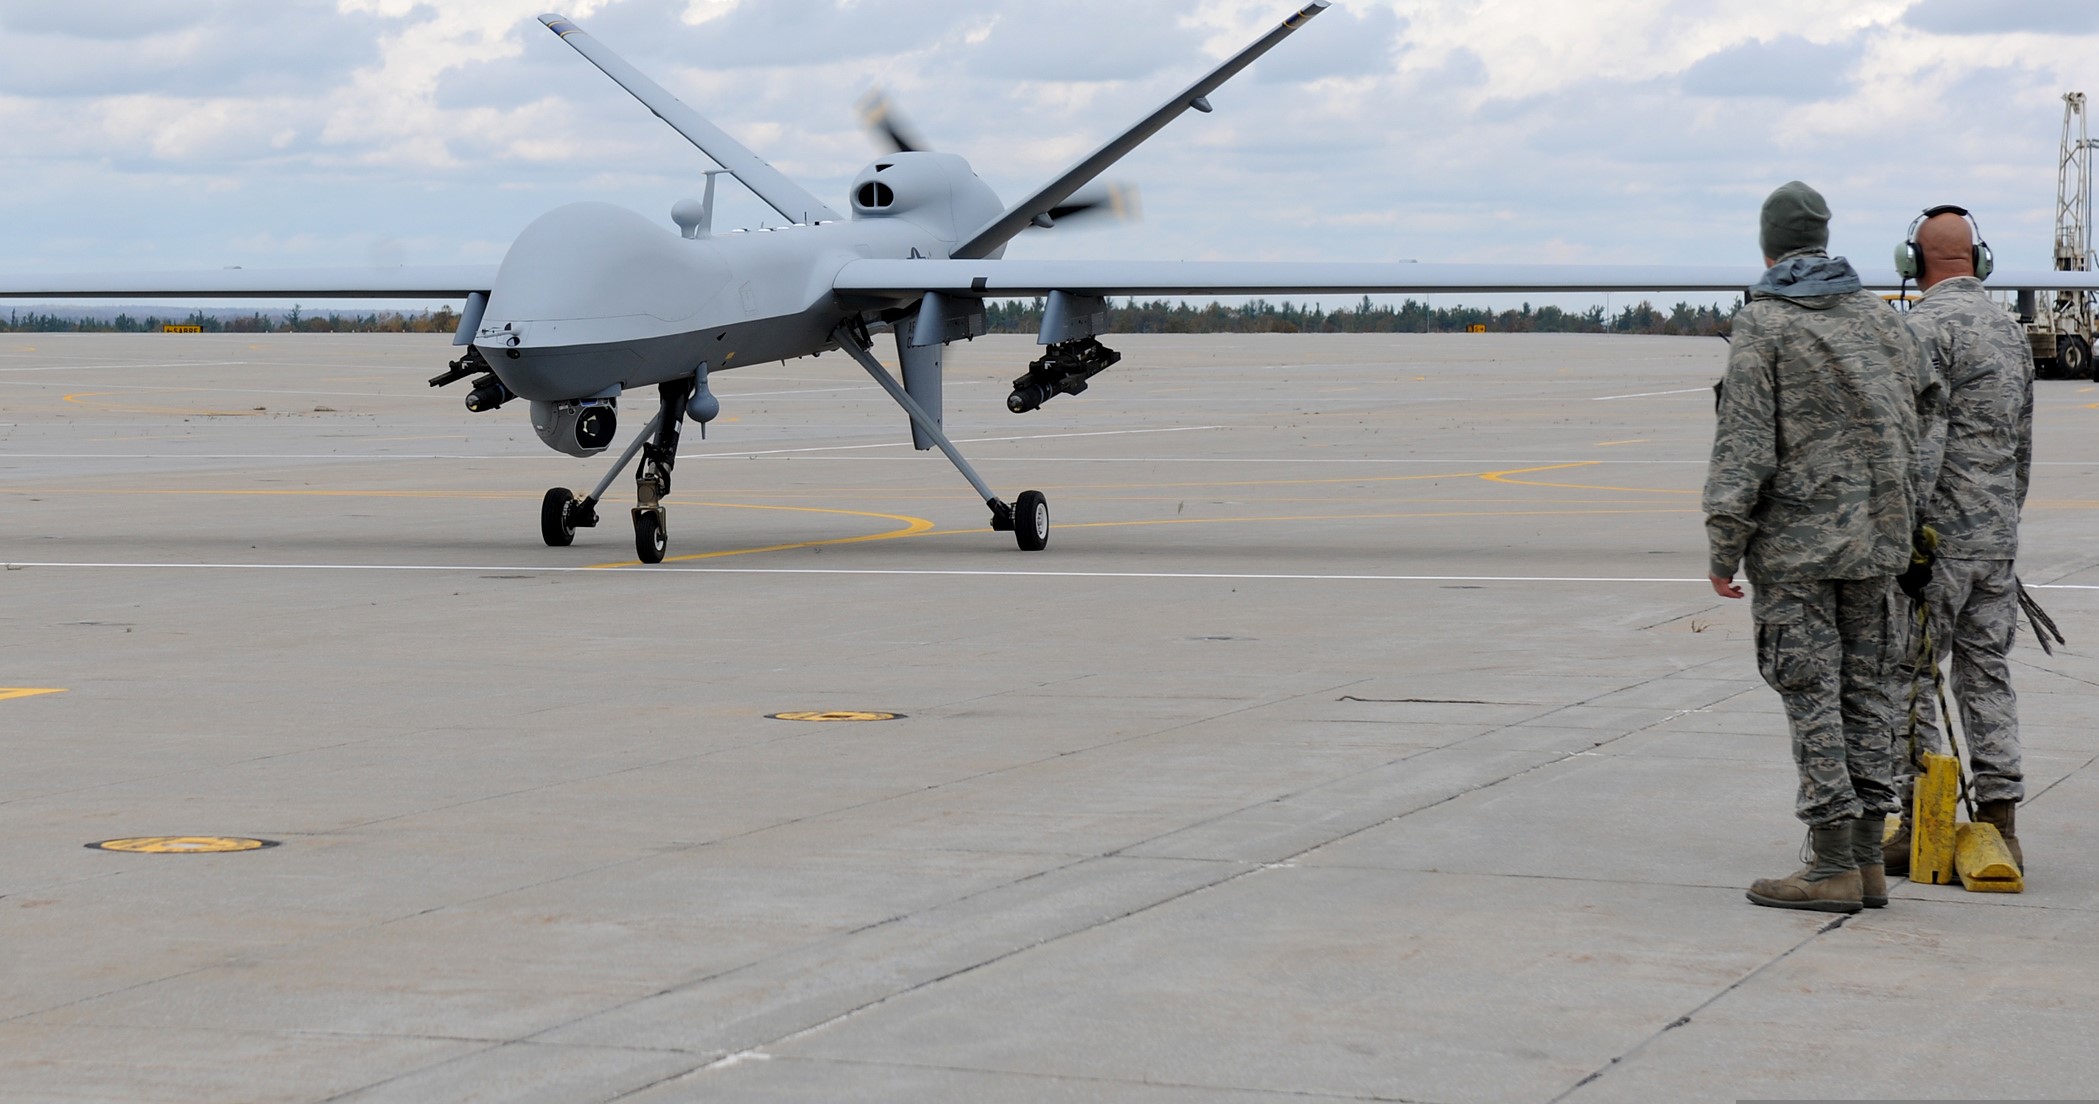 China's CH-5 Rainbow is modelled on the US MQ-9 Reaper, pictured here at a US Army Airfield. (Photo: Getty Images) 